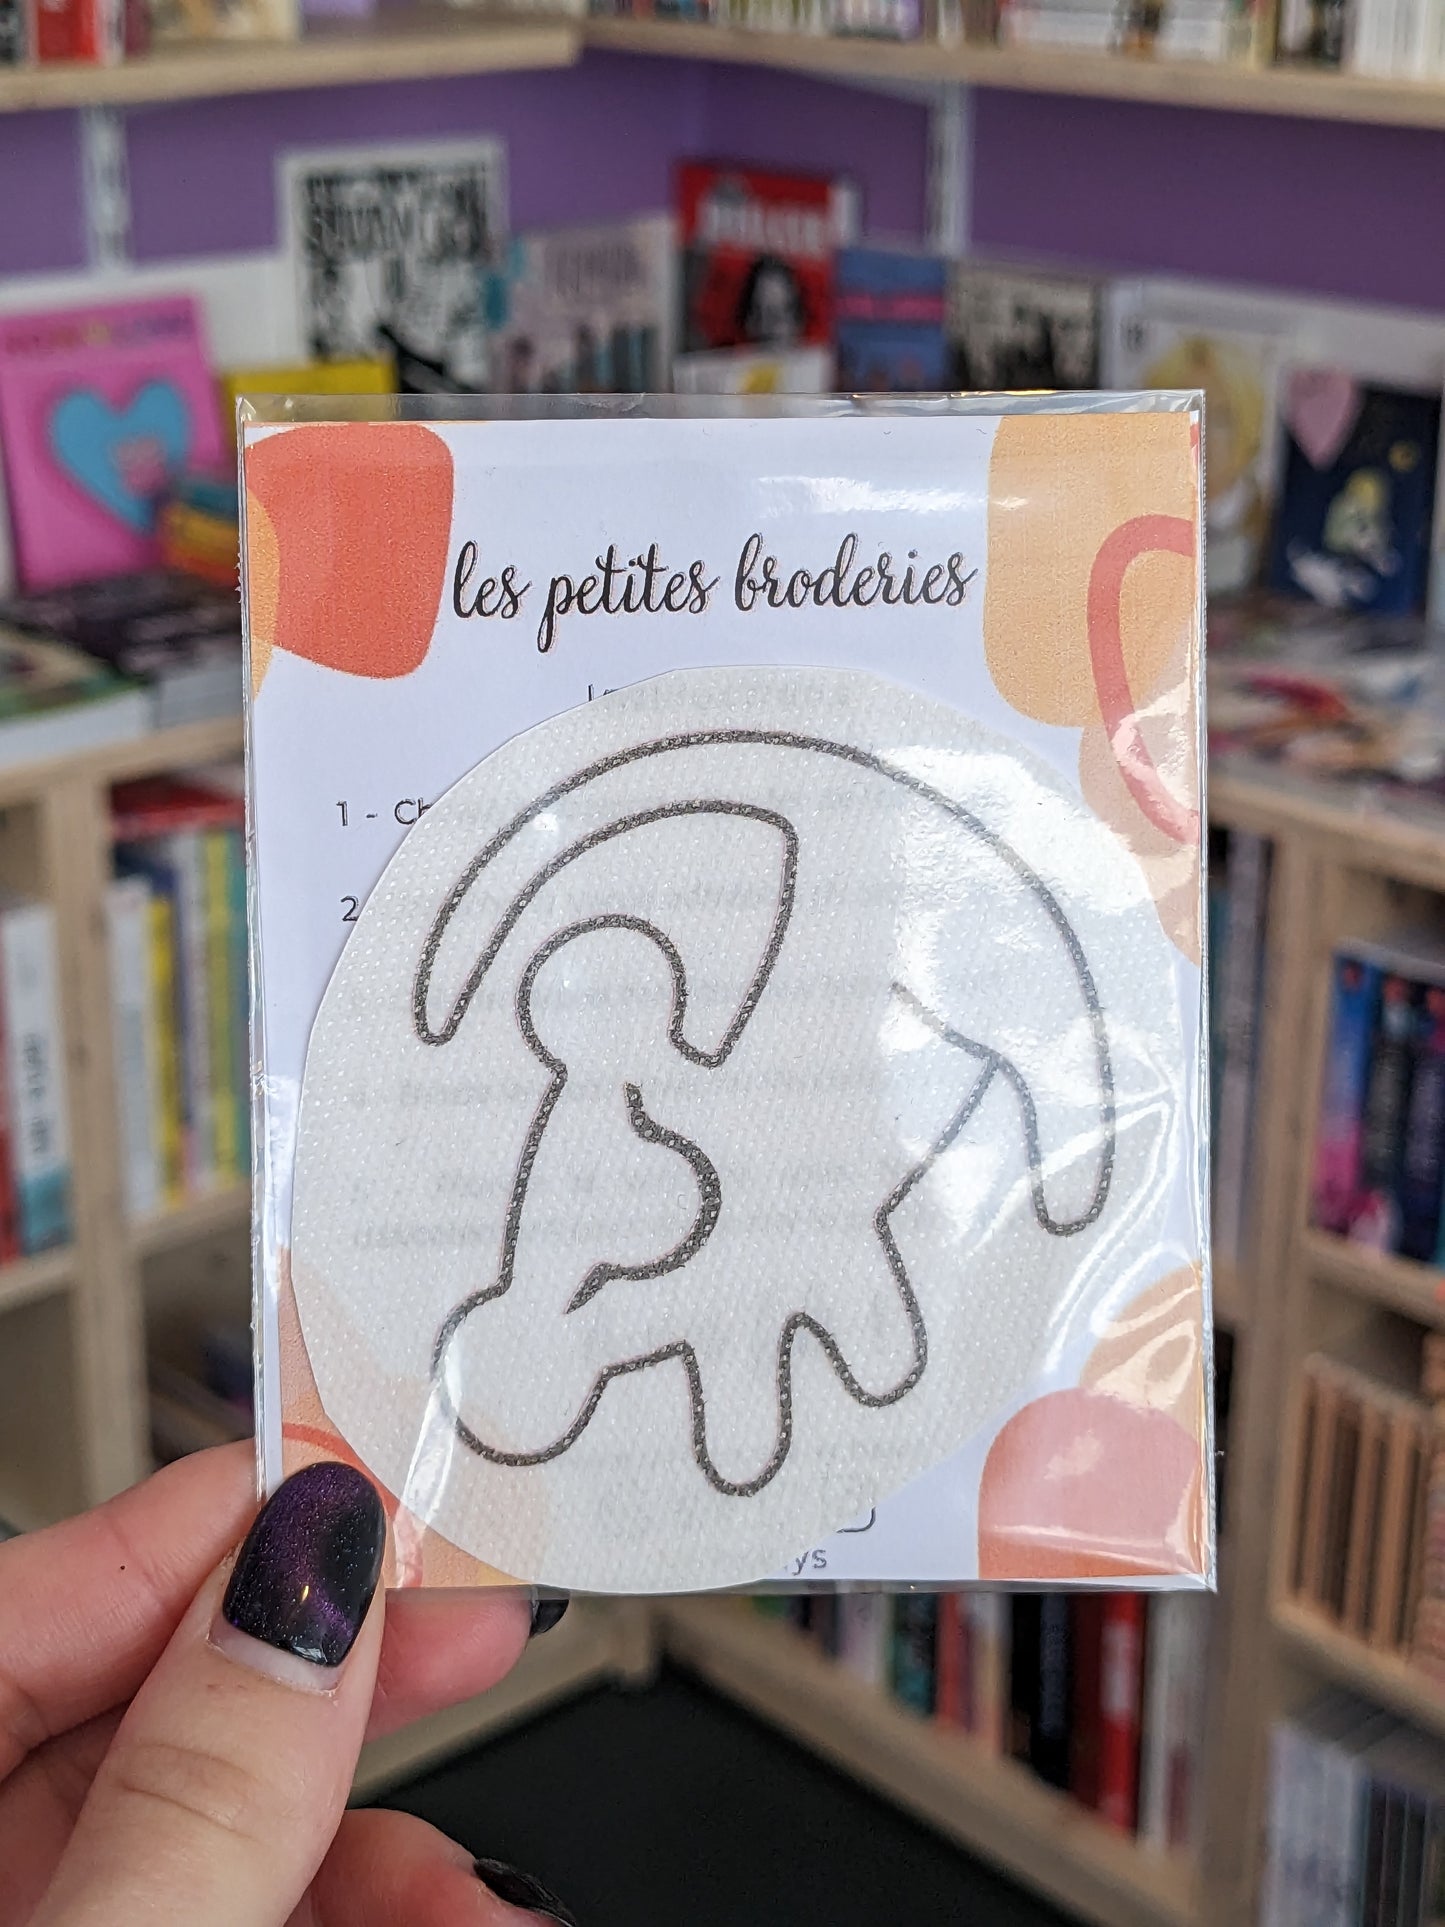 Sticker hydrosoluble "Les petites broderies"